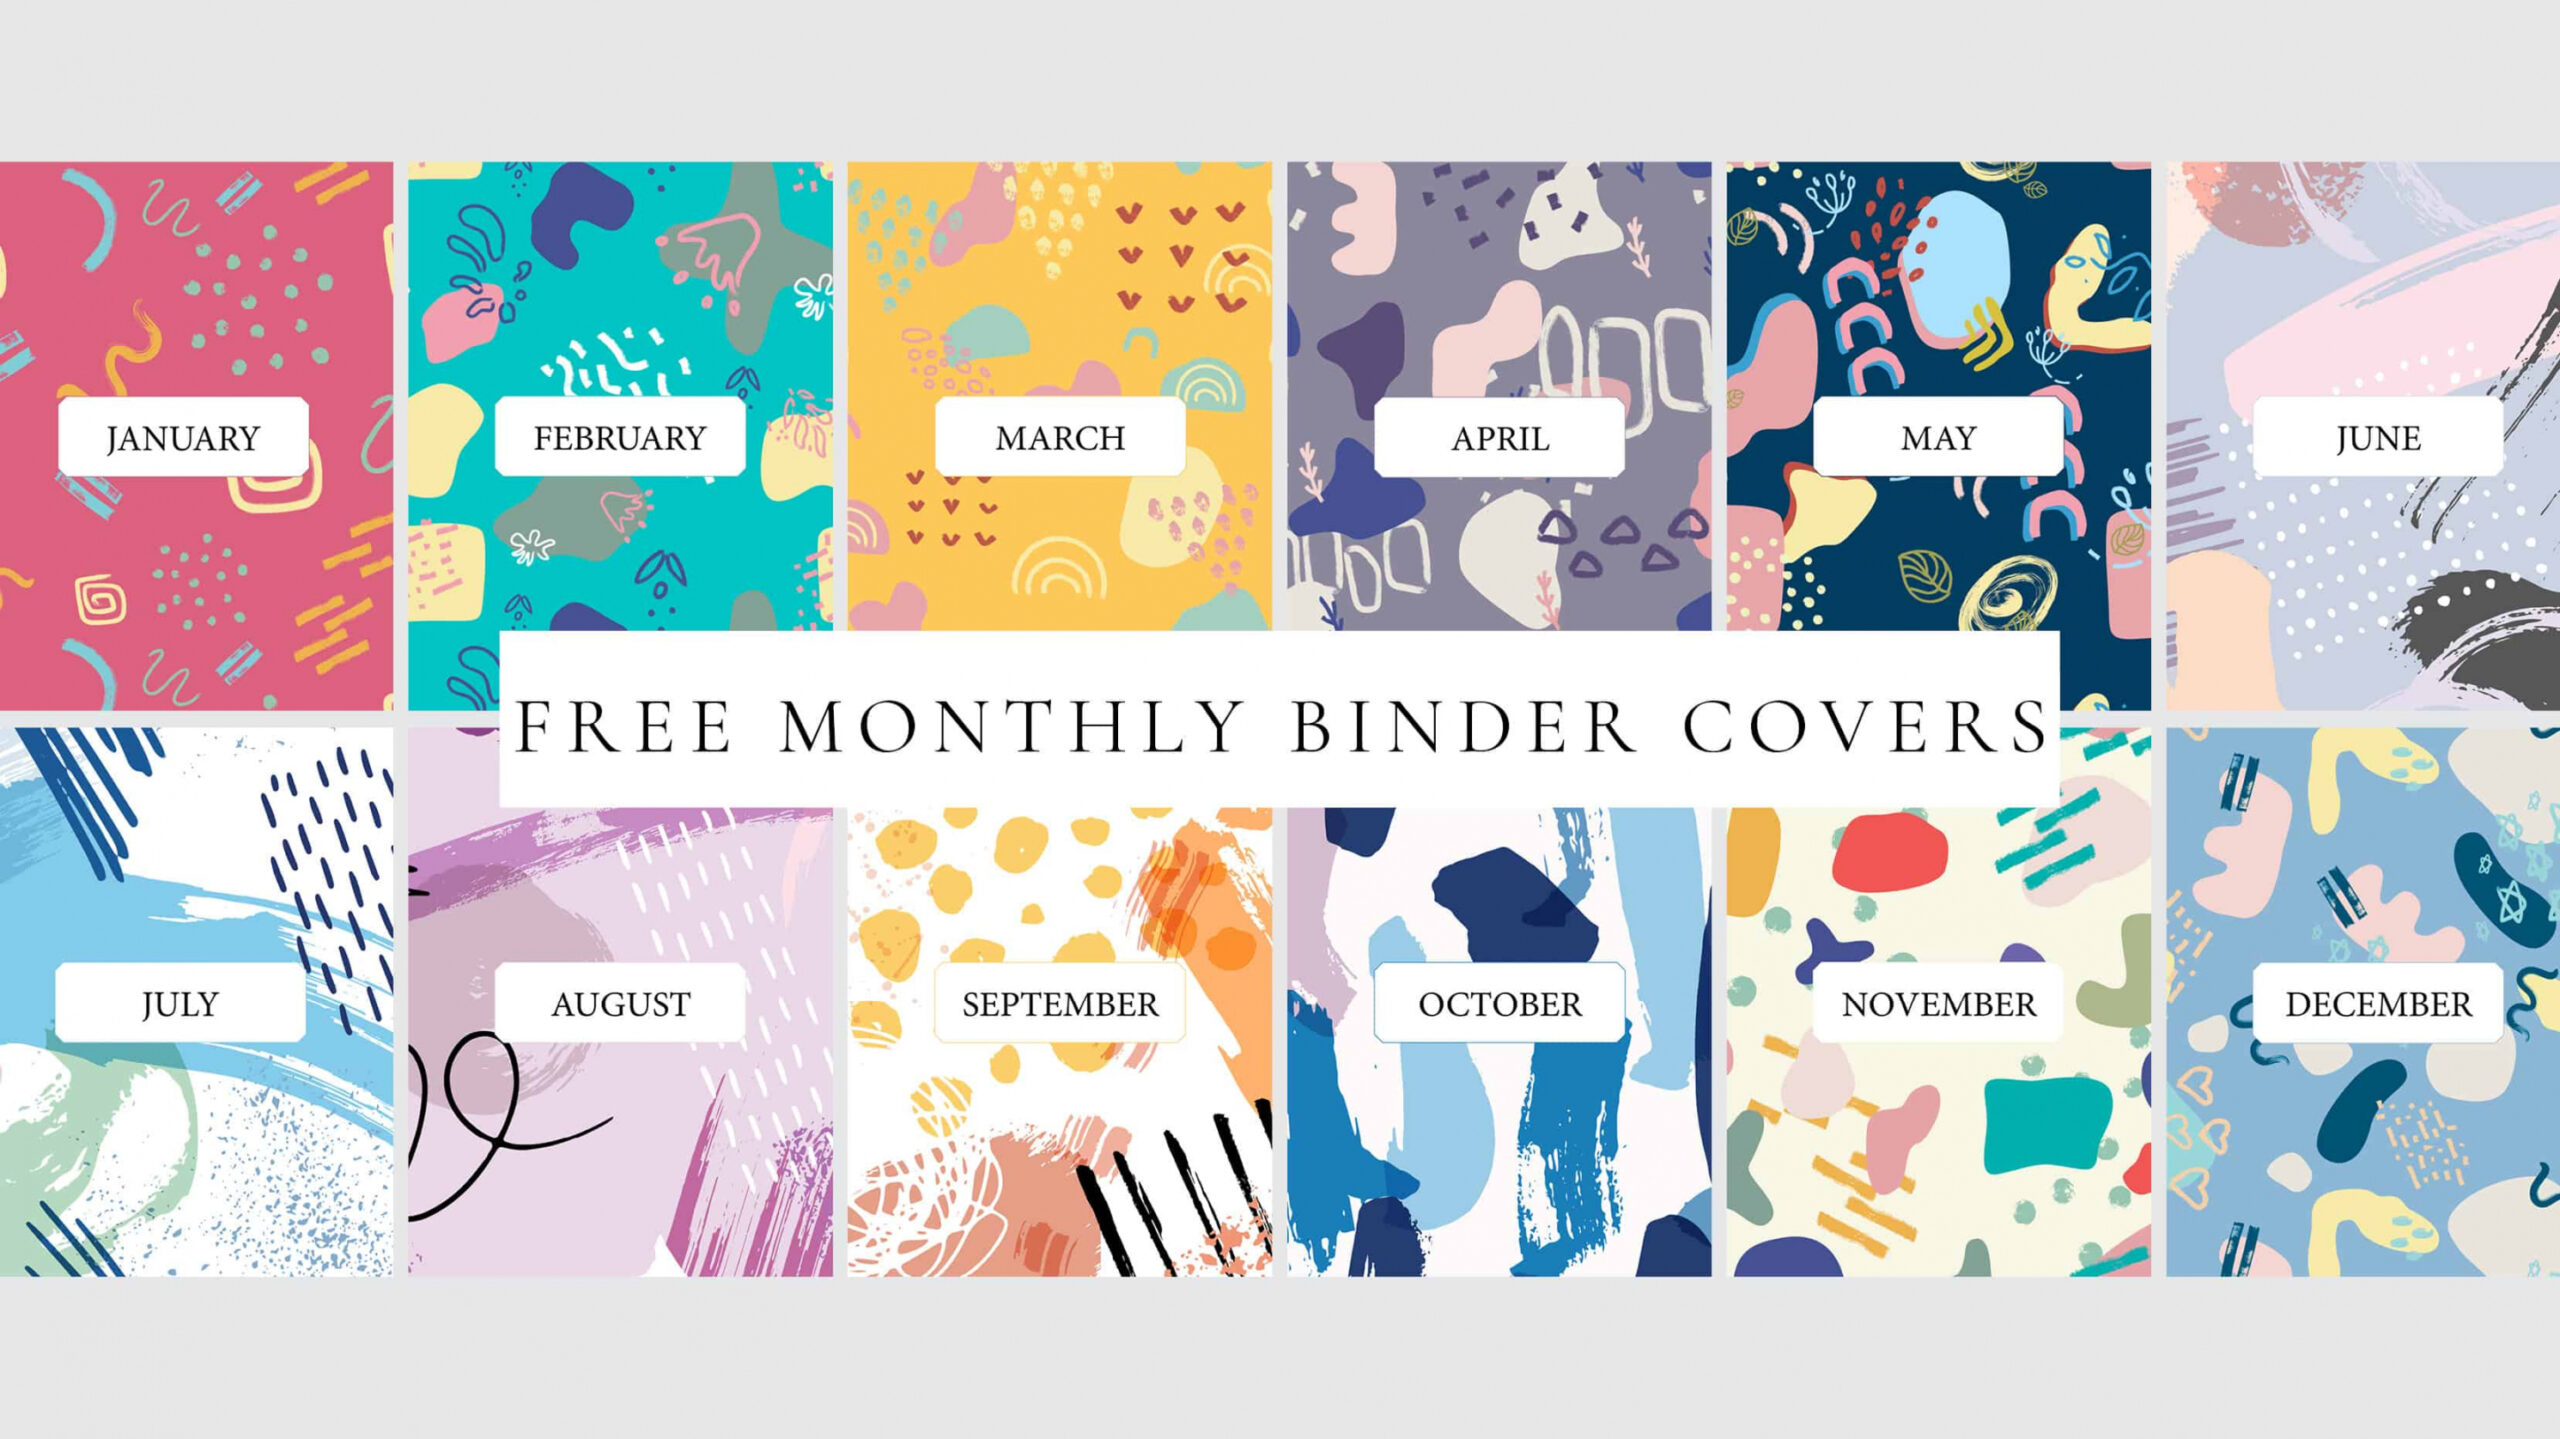 FREE Printable Monthly Binder Covers - My Printable Home - FREE Printables - Free Printable Binder Cover